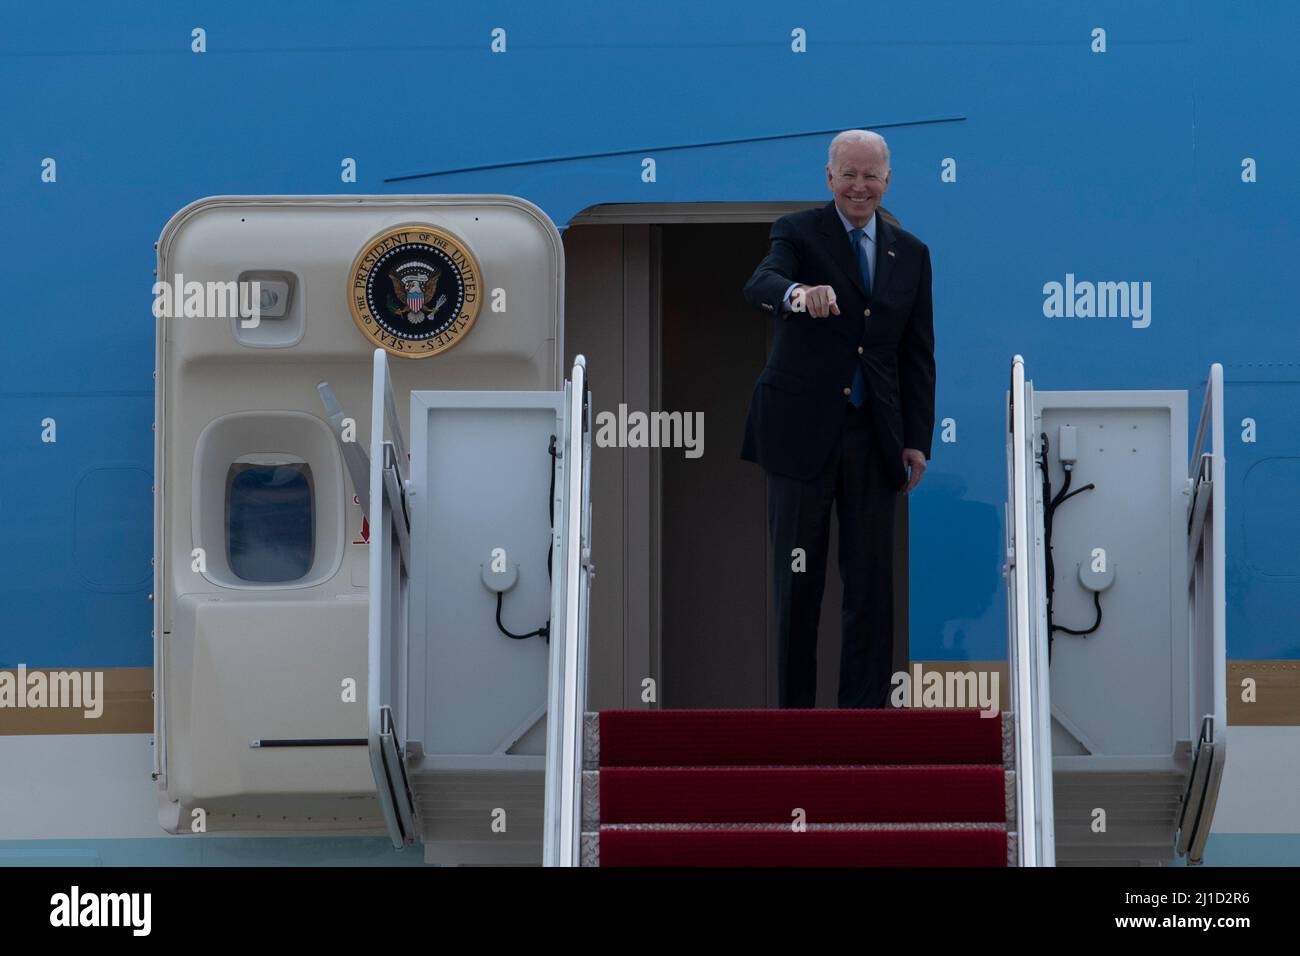 U.S. President Joe Biden boards Air Force One prior departing for his trip to Europe at Joint Base Andrews, Md., March 23, 2022. (U.S. Air Force photo by Staff Sgt. Jason Huddleston) Stock Photo